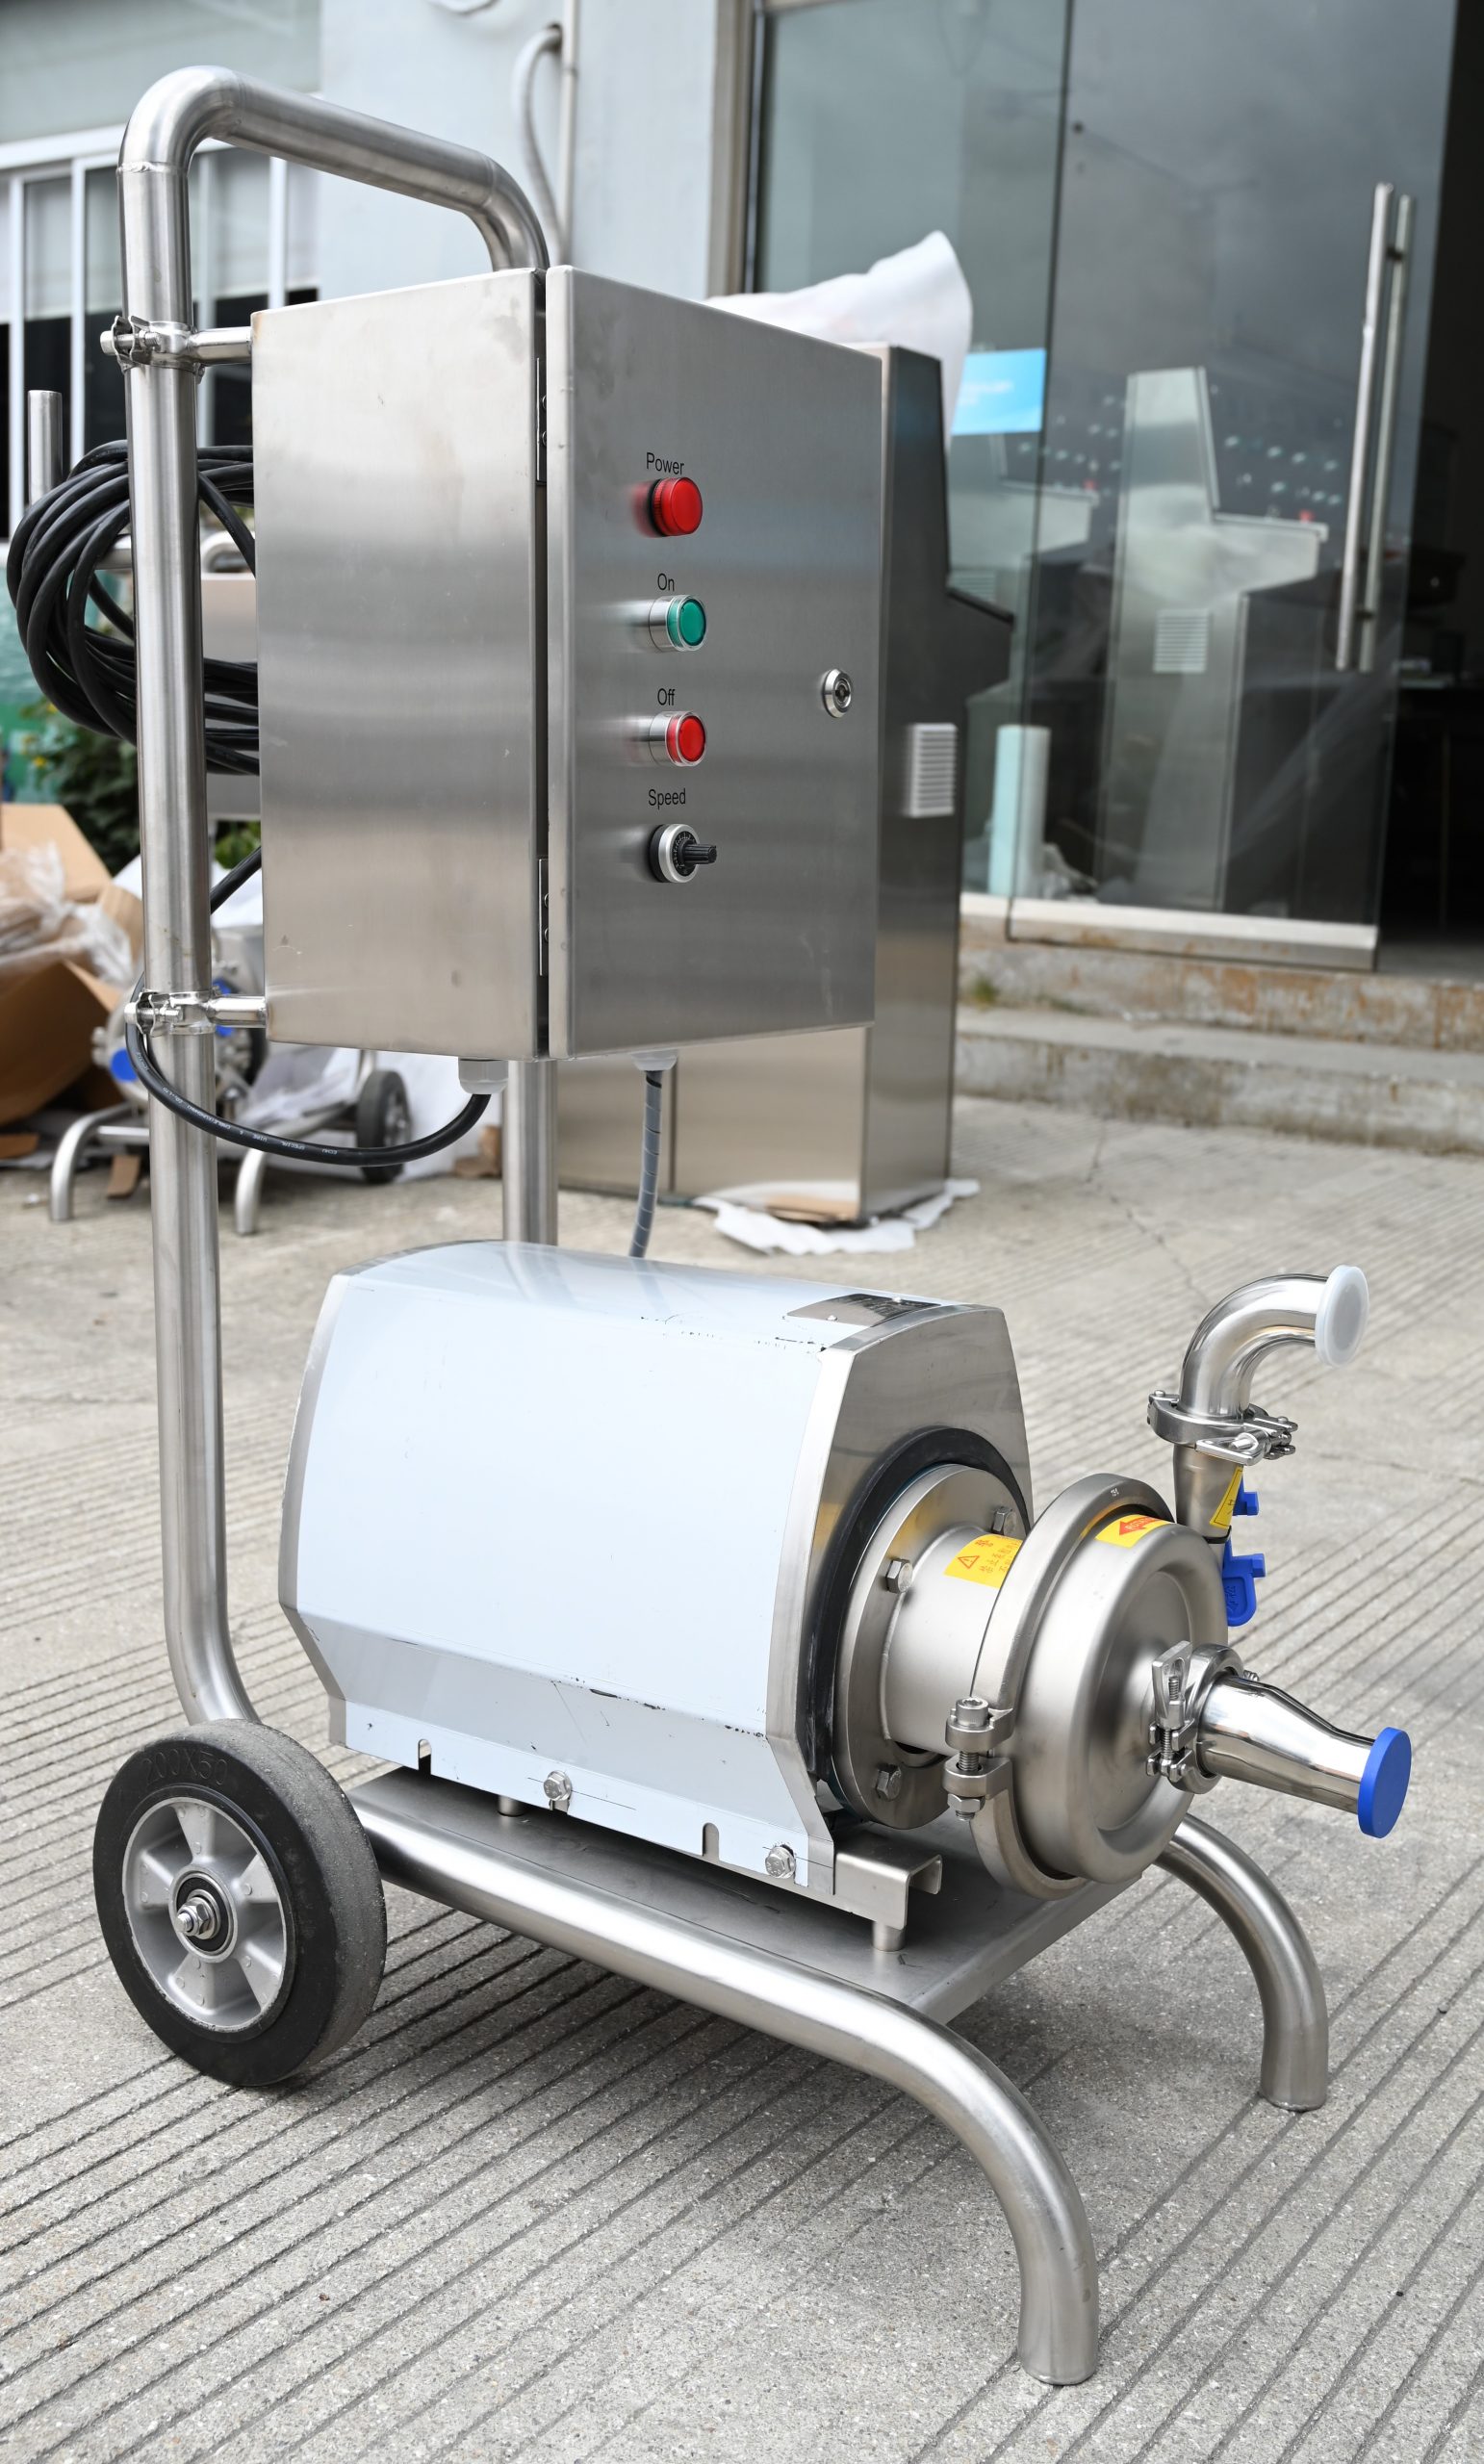 The Portable Pump For Brewing Equipment